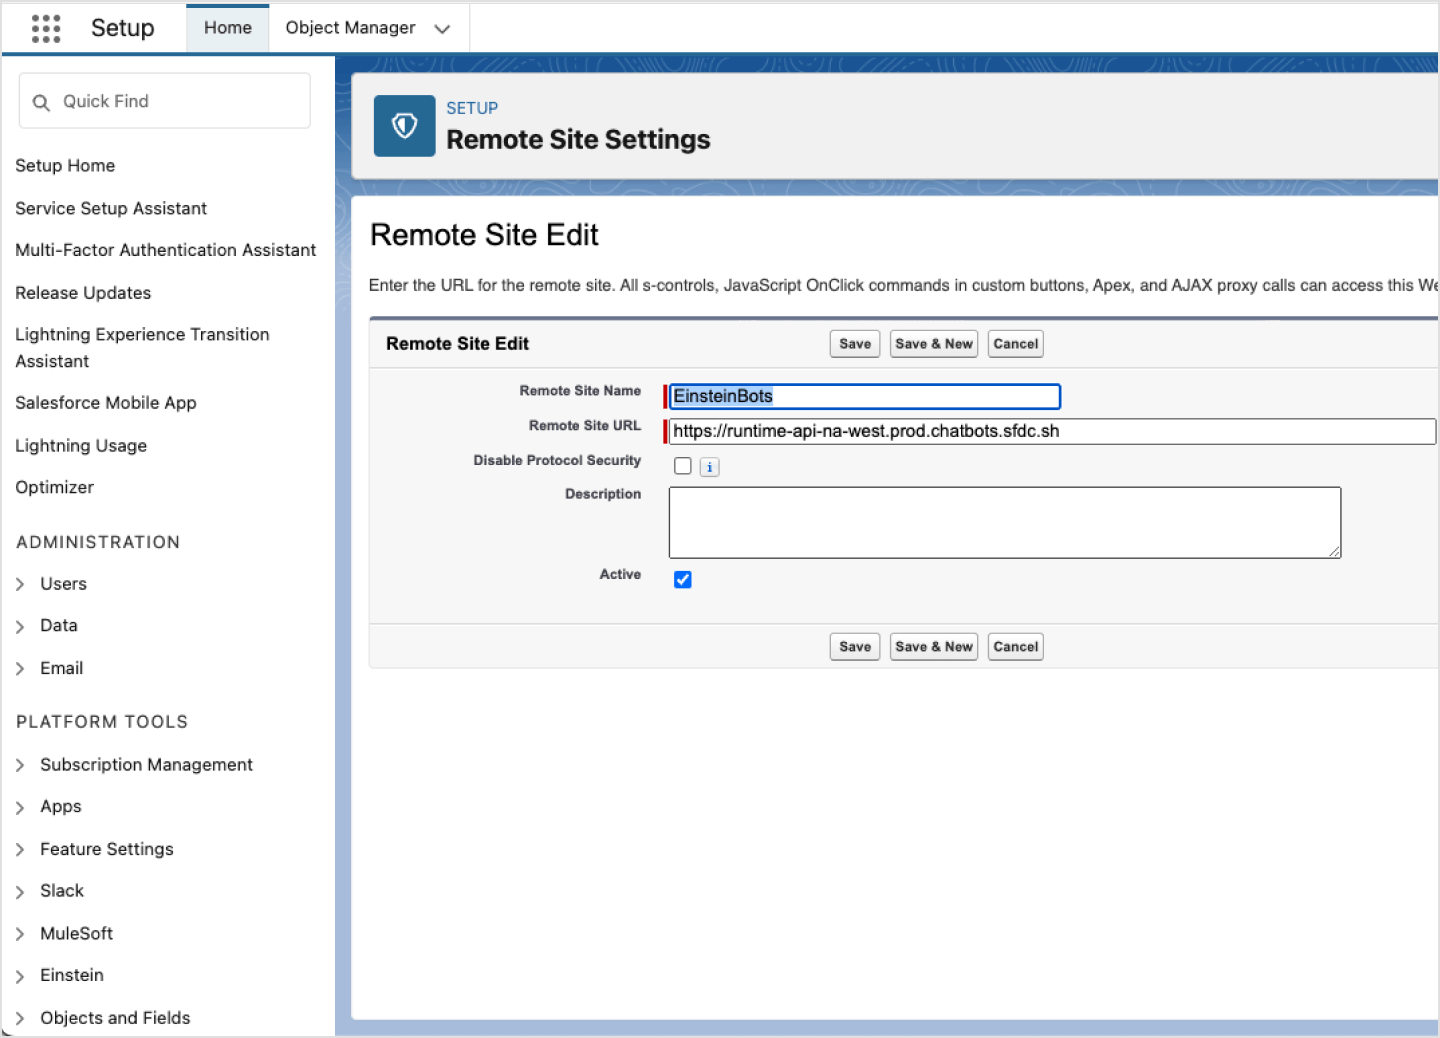 image|A screenshot of the Edit page of Remote Site Settings